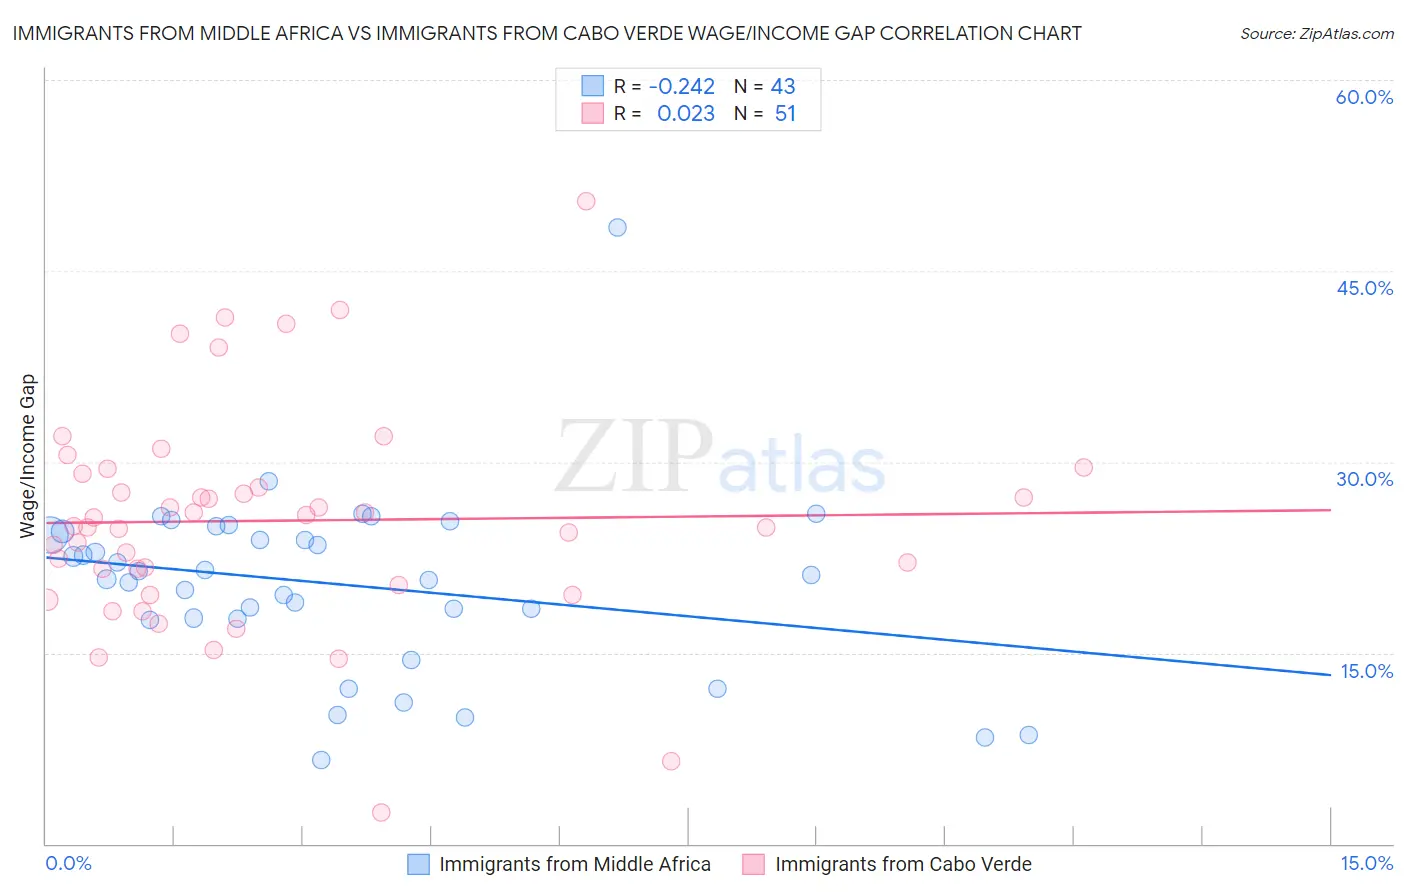 Immigrants from Middle Africa vs Immigrants from Cabo Verde Wage/Income Gap